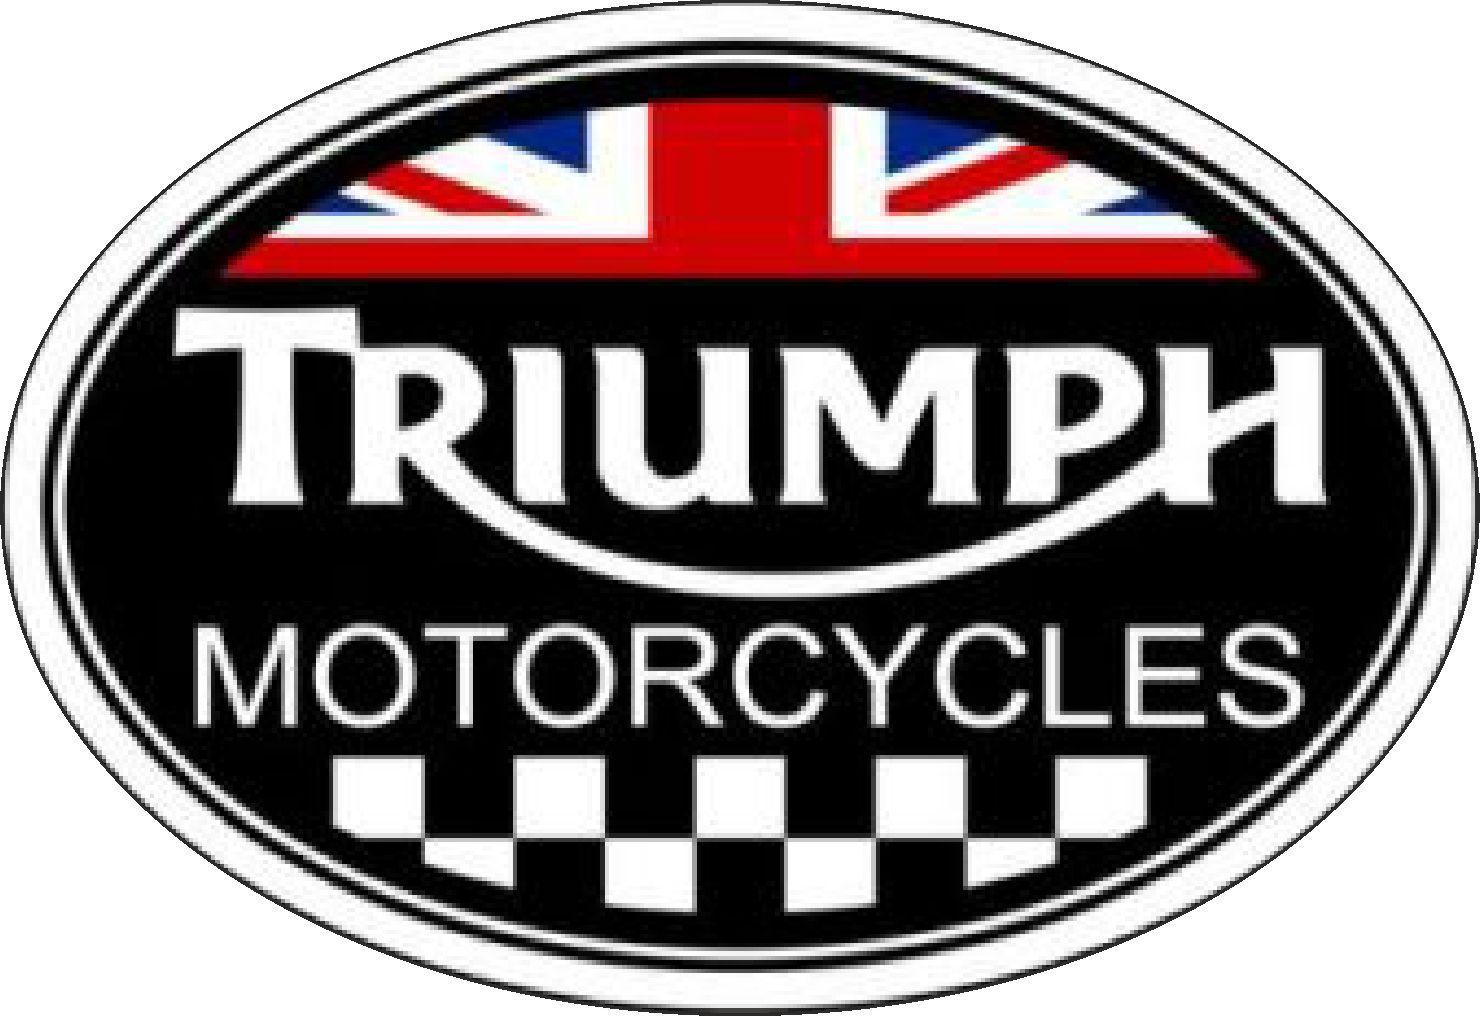 New Triumph Motorcycle Logo - Triumph Motorcyles fined $2.9 million over defect data | Protecting ...